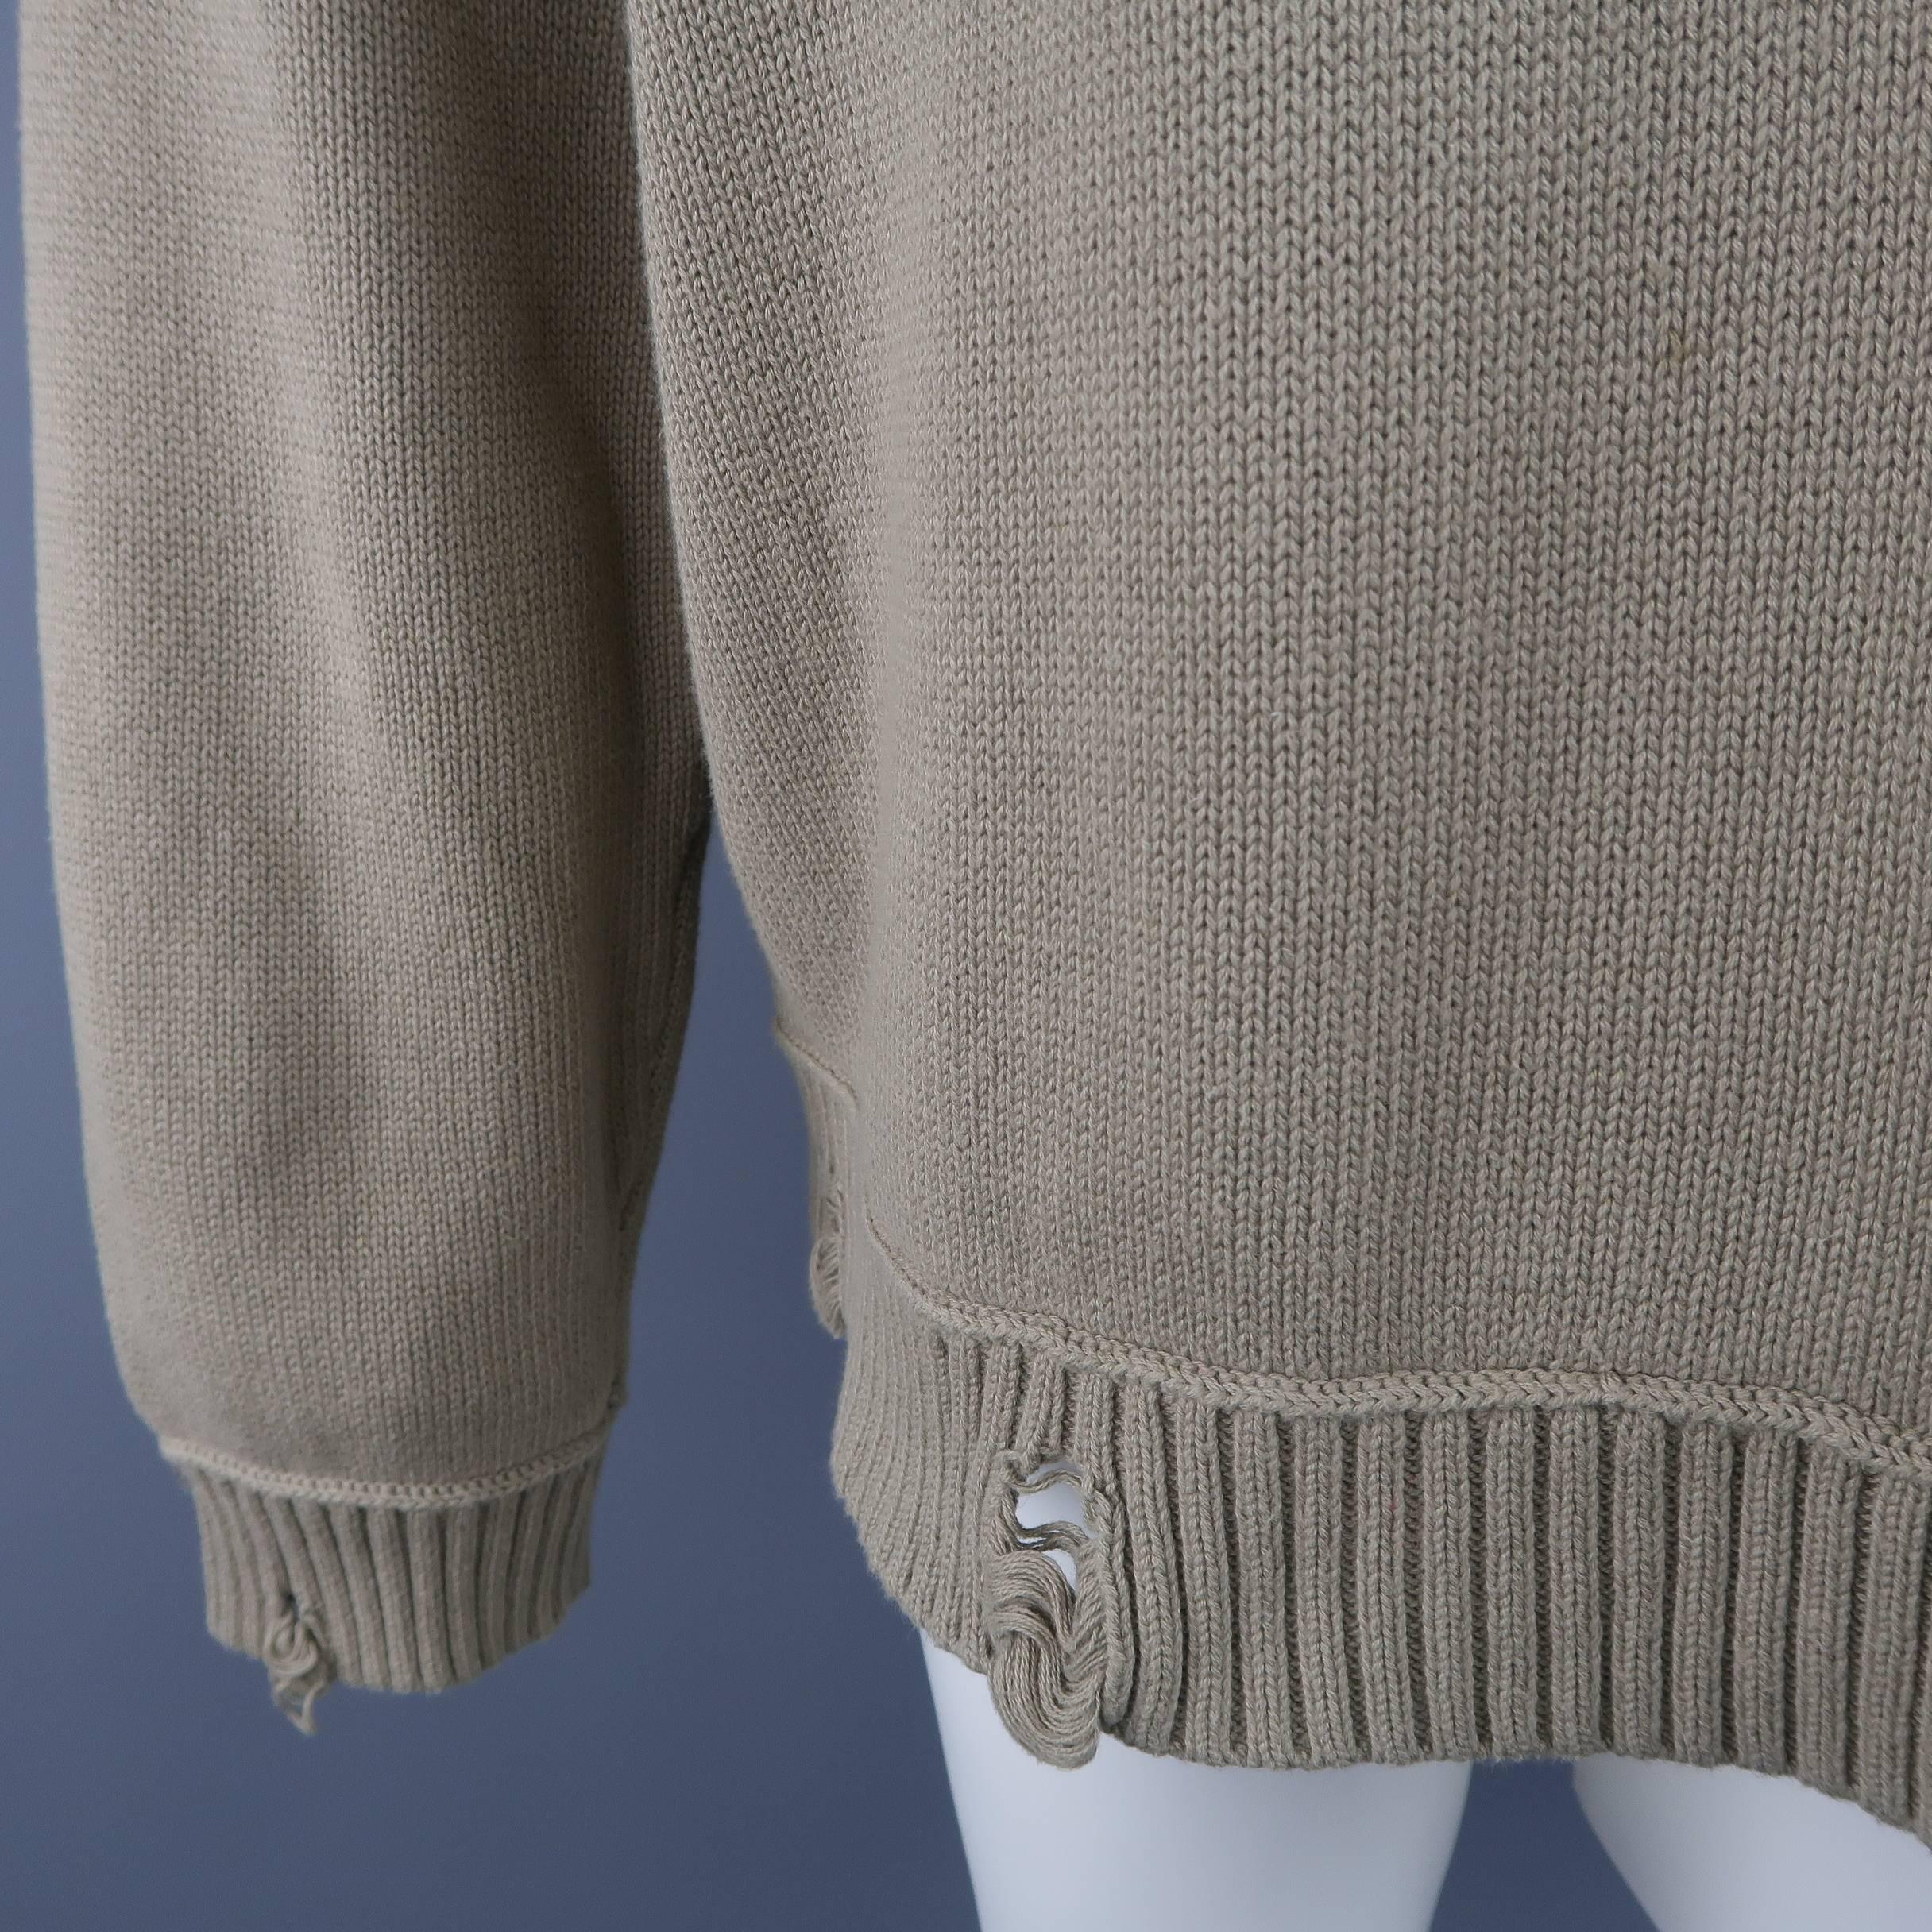 ISABEL BENENATO oversized pullover sweater comes in a beige cotton knit with a crewneck and destroyed details throughout. Made in Italy.
 
Excellent Pre-Owned Condition.
Marked: L
 
Measurements:
 
Shoulder: 27 in.
Chest: 50 in.
Sleeve: 22